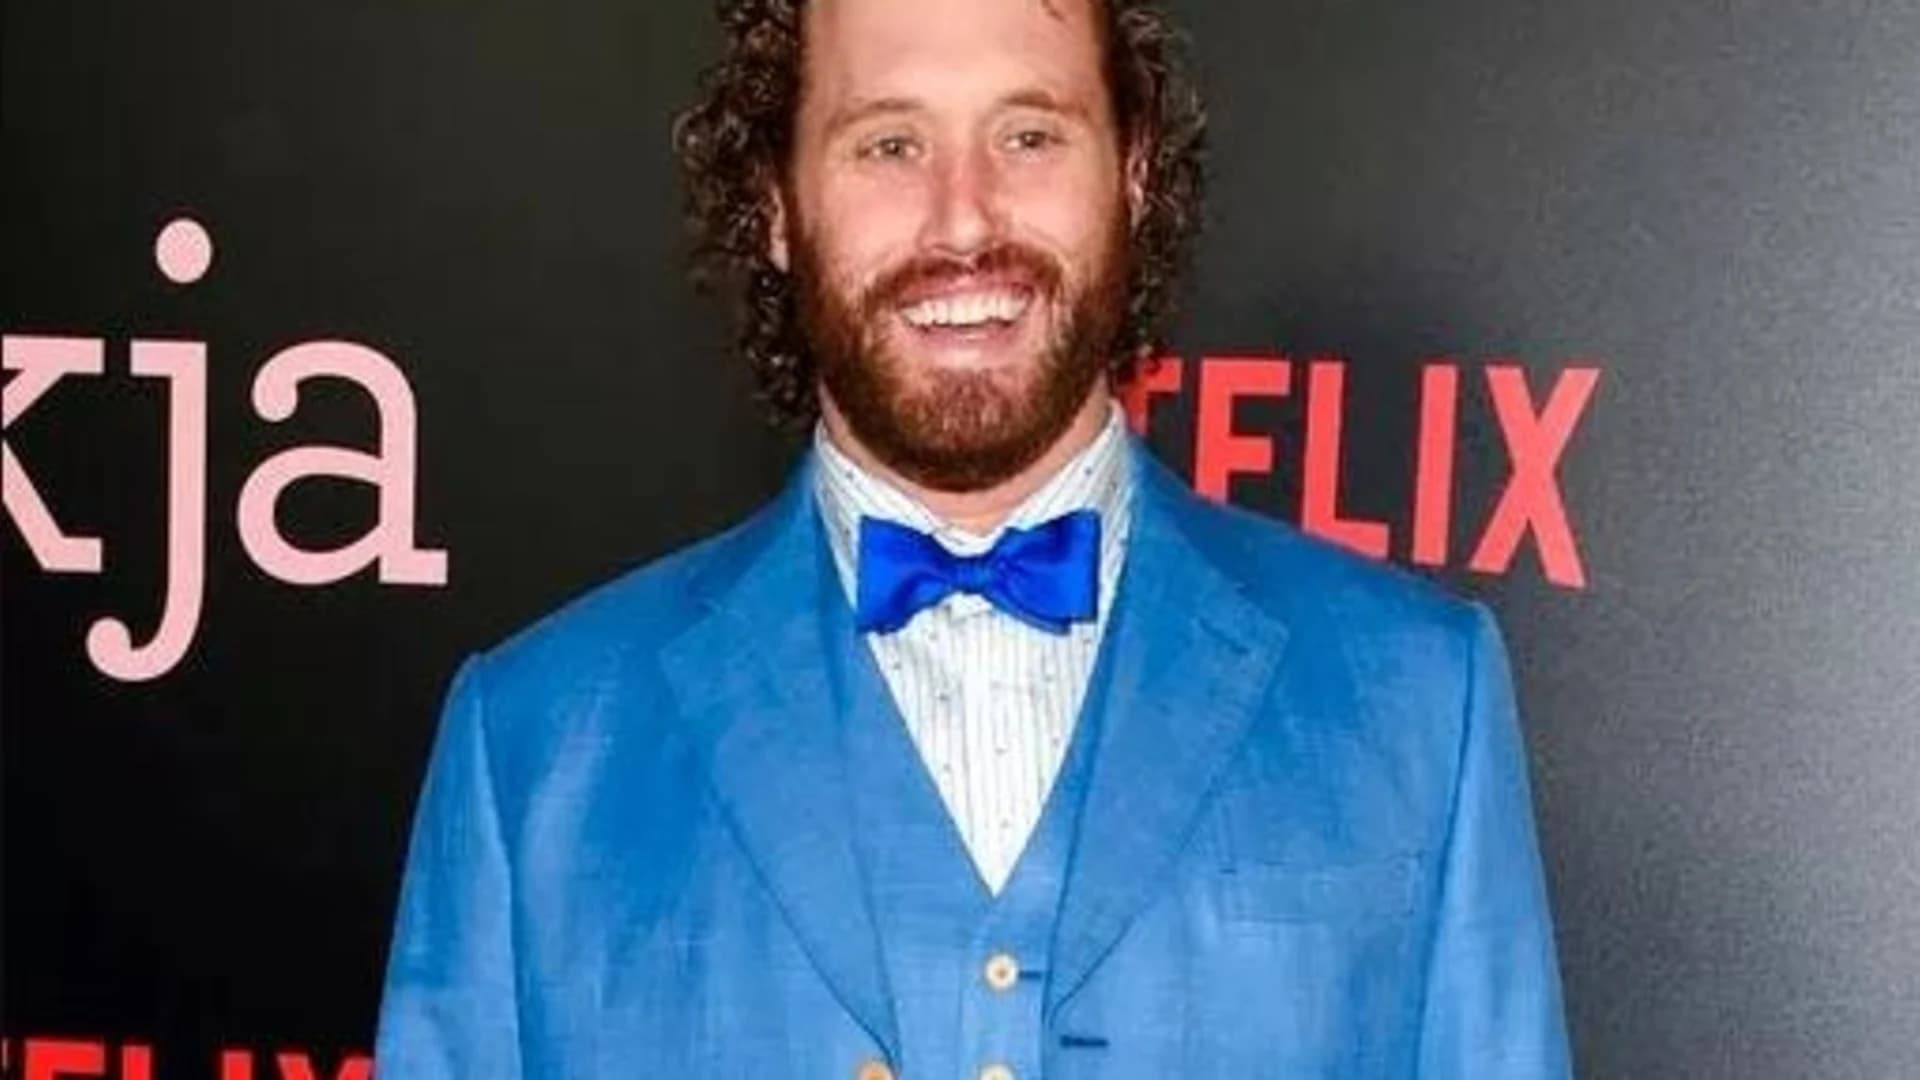 Actor T.J. Miller charged with making bomb report on train in NJ